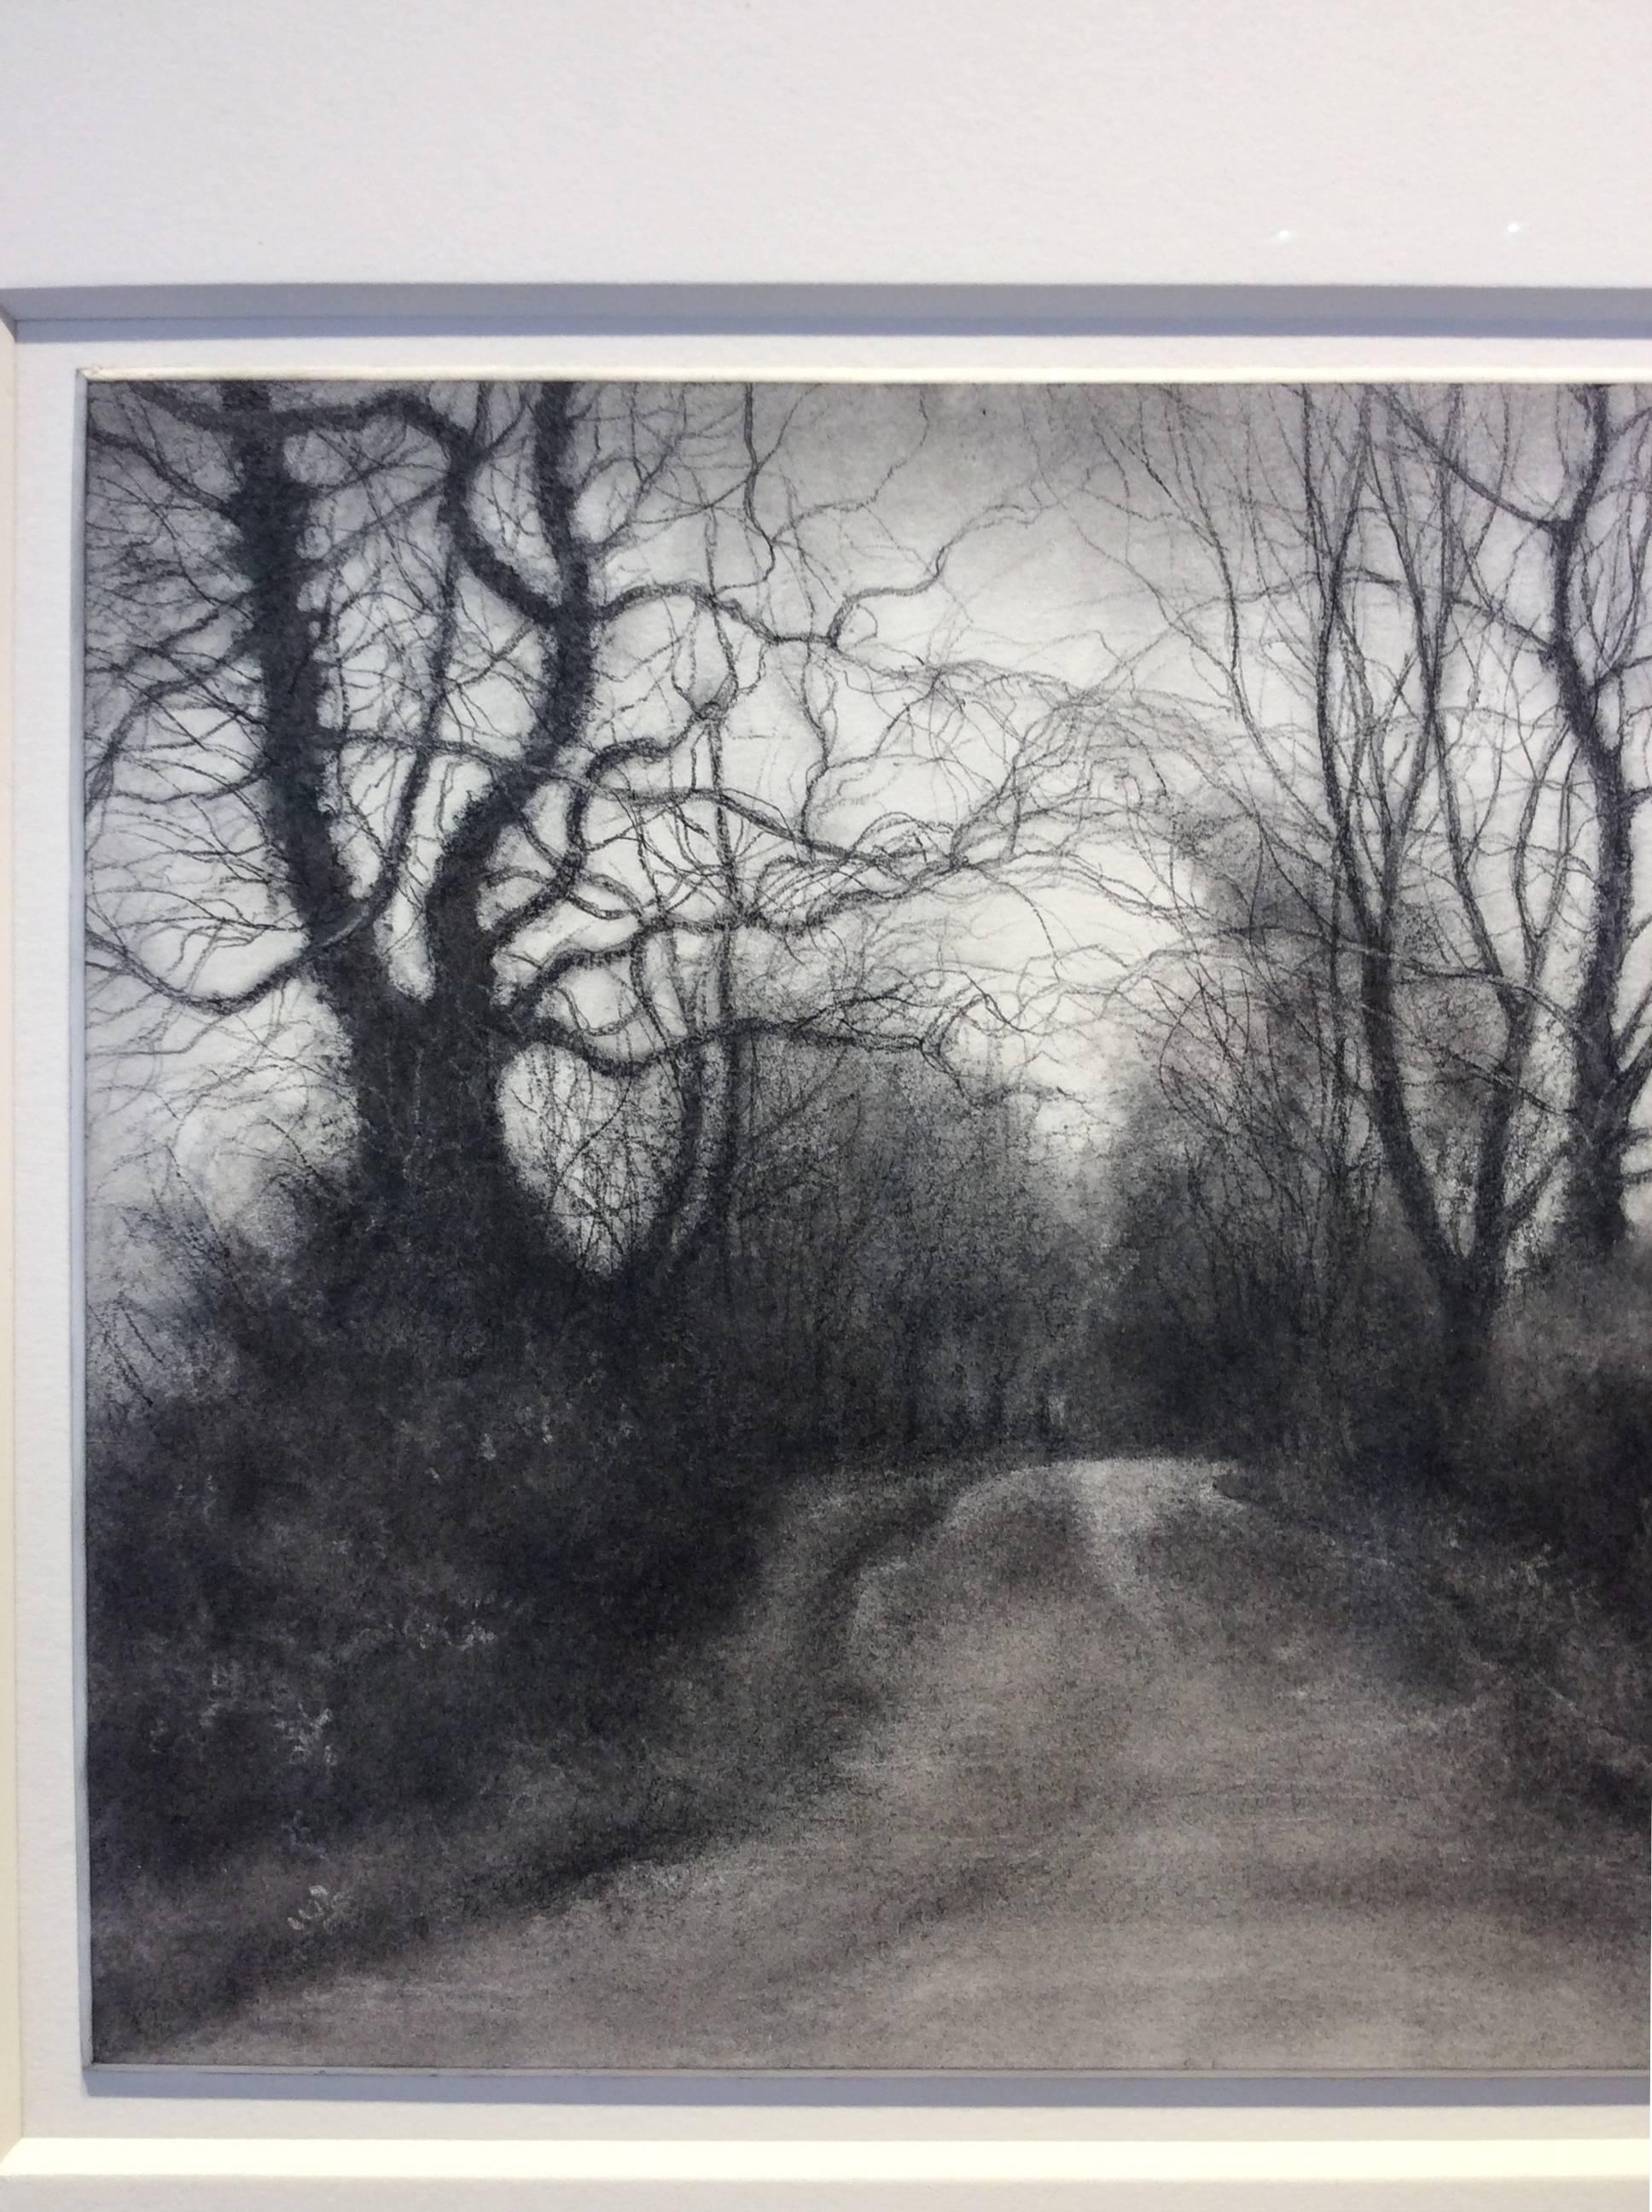 Rural Road 7 (Realistic Black & White Charcoal Drawing of Country Road & Trees) - Modern Art by Sue Bryan